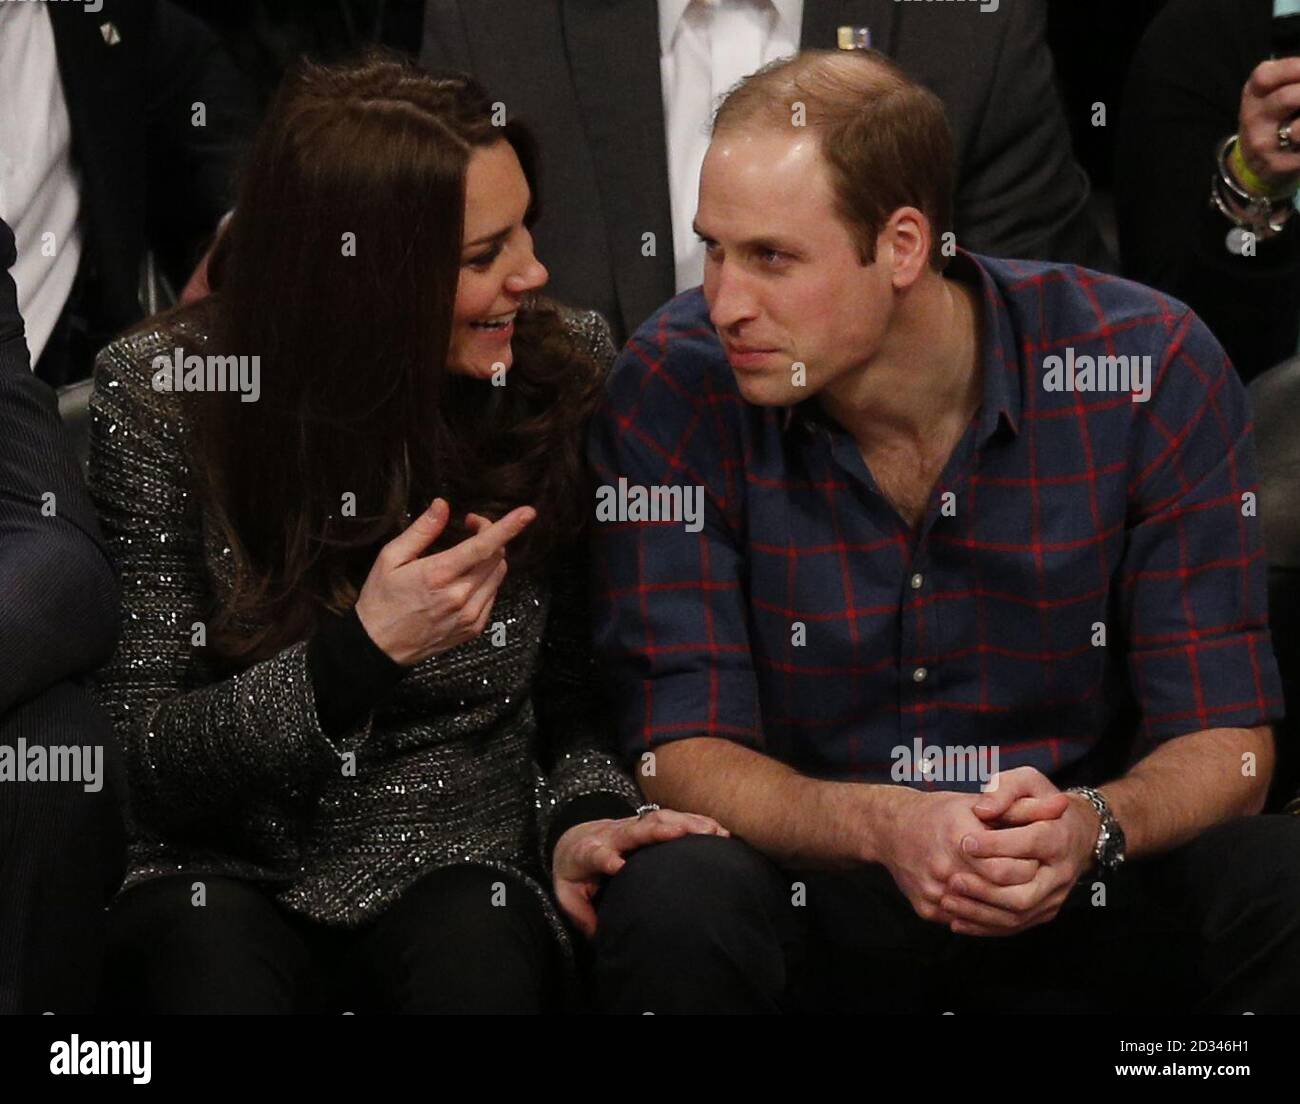 The Duke and Duchess of Cambridge attend the match between New Jersey Nets and Cleveland Cavaliers at Barclays Center, Brooklyn, New York. Stock Photo